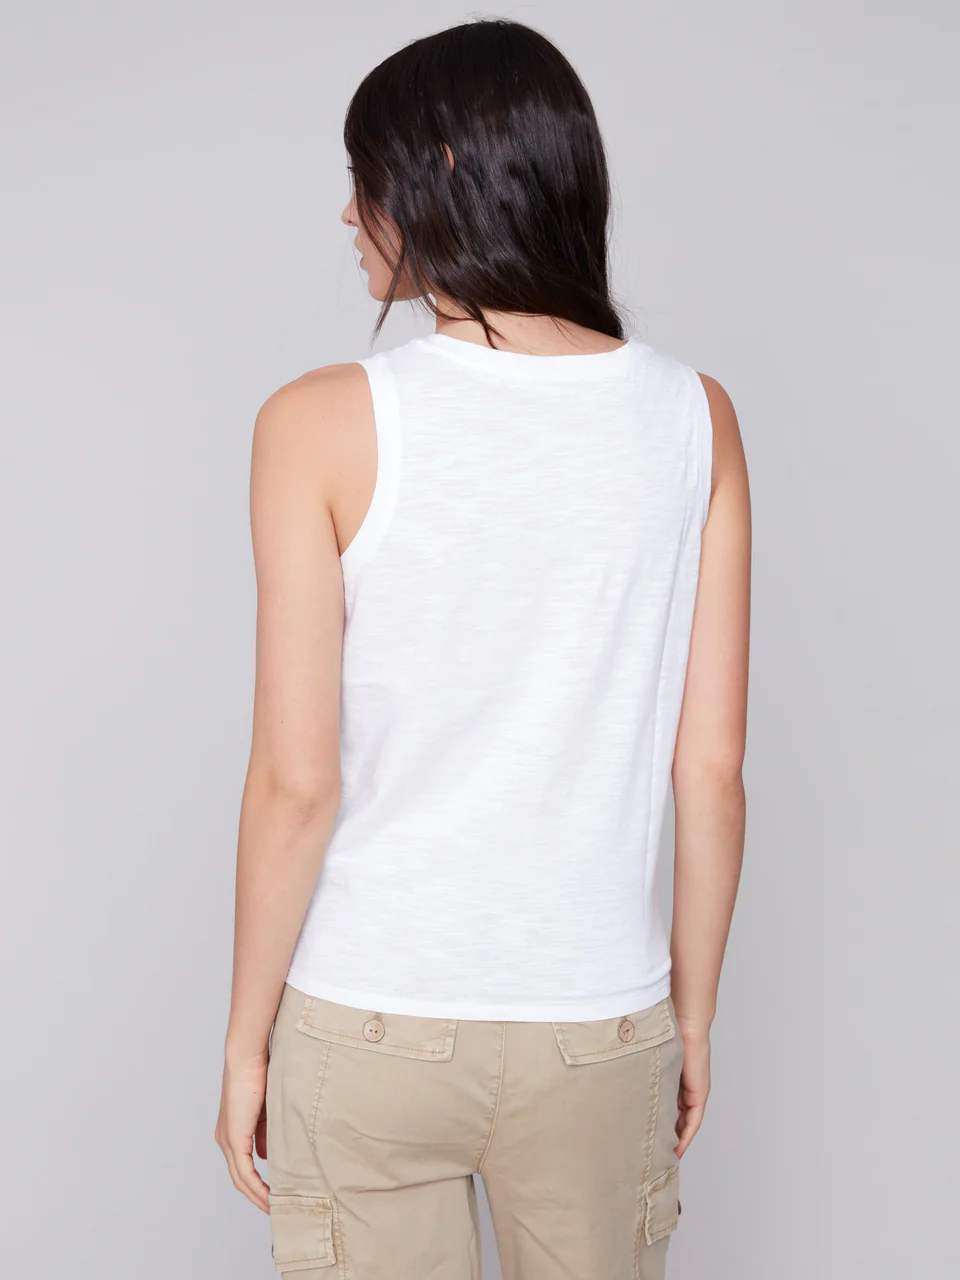 Charlie B Tank - White Clothing - Tops - Shirts - Sleeveless Knits by Charlie B | Grace the Boutique